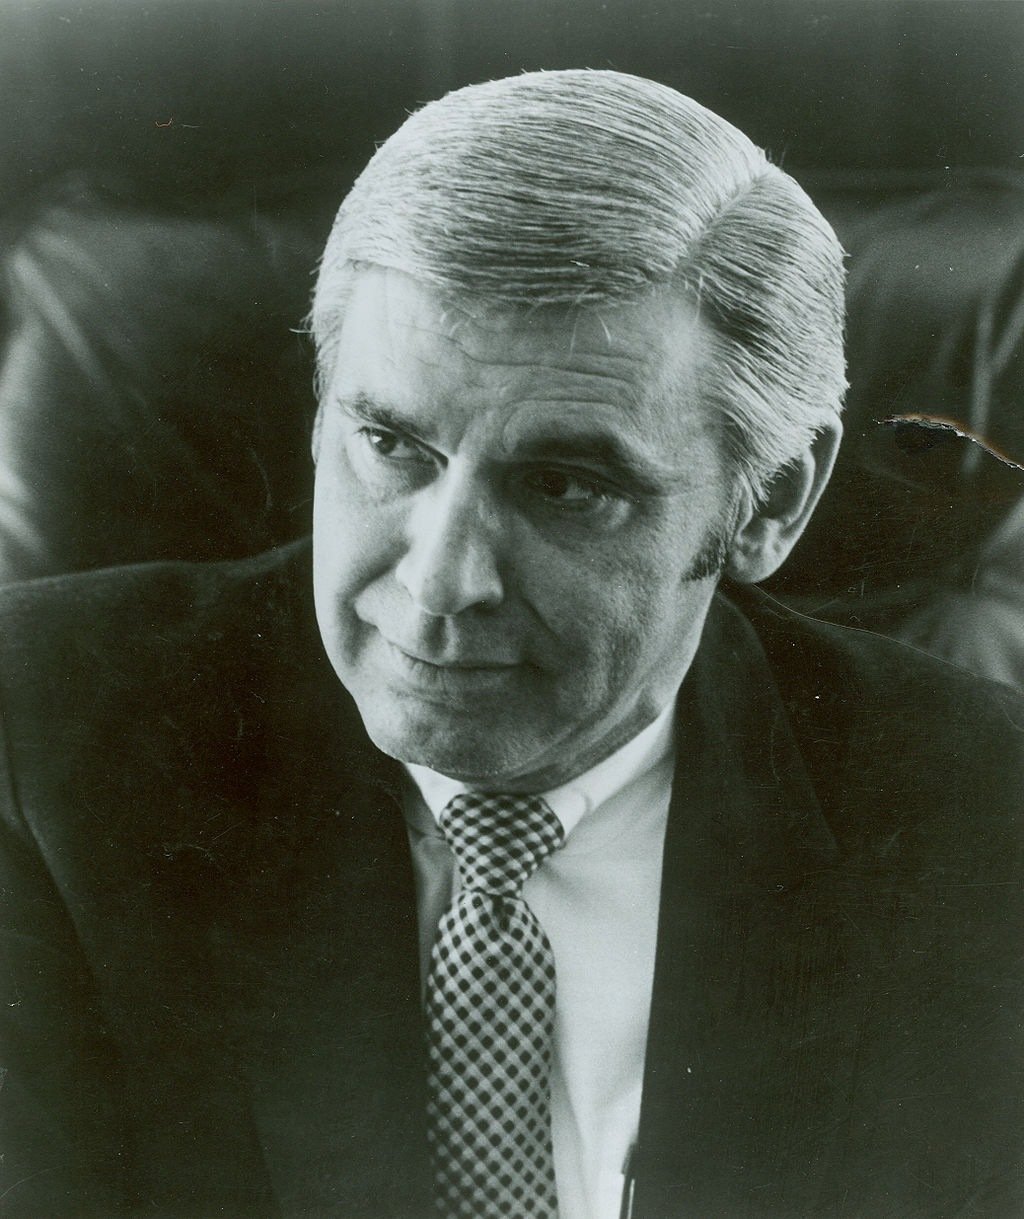 California Congressman Leo Ryan, who was murdered with his staff while investigating reports of abuse at Jim Jones' People's Temple in the jungle near Jonestown, Guyana on November 18, 1978. 